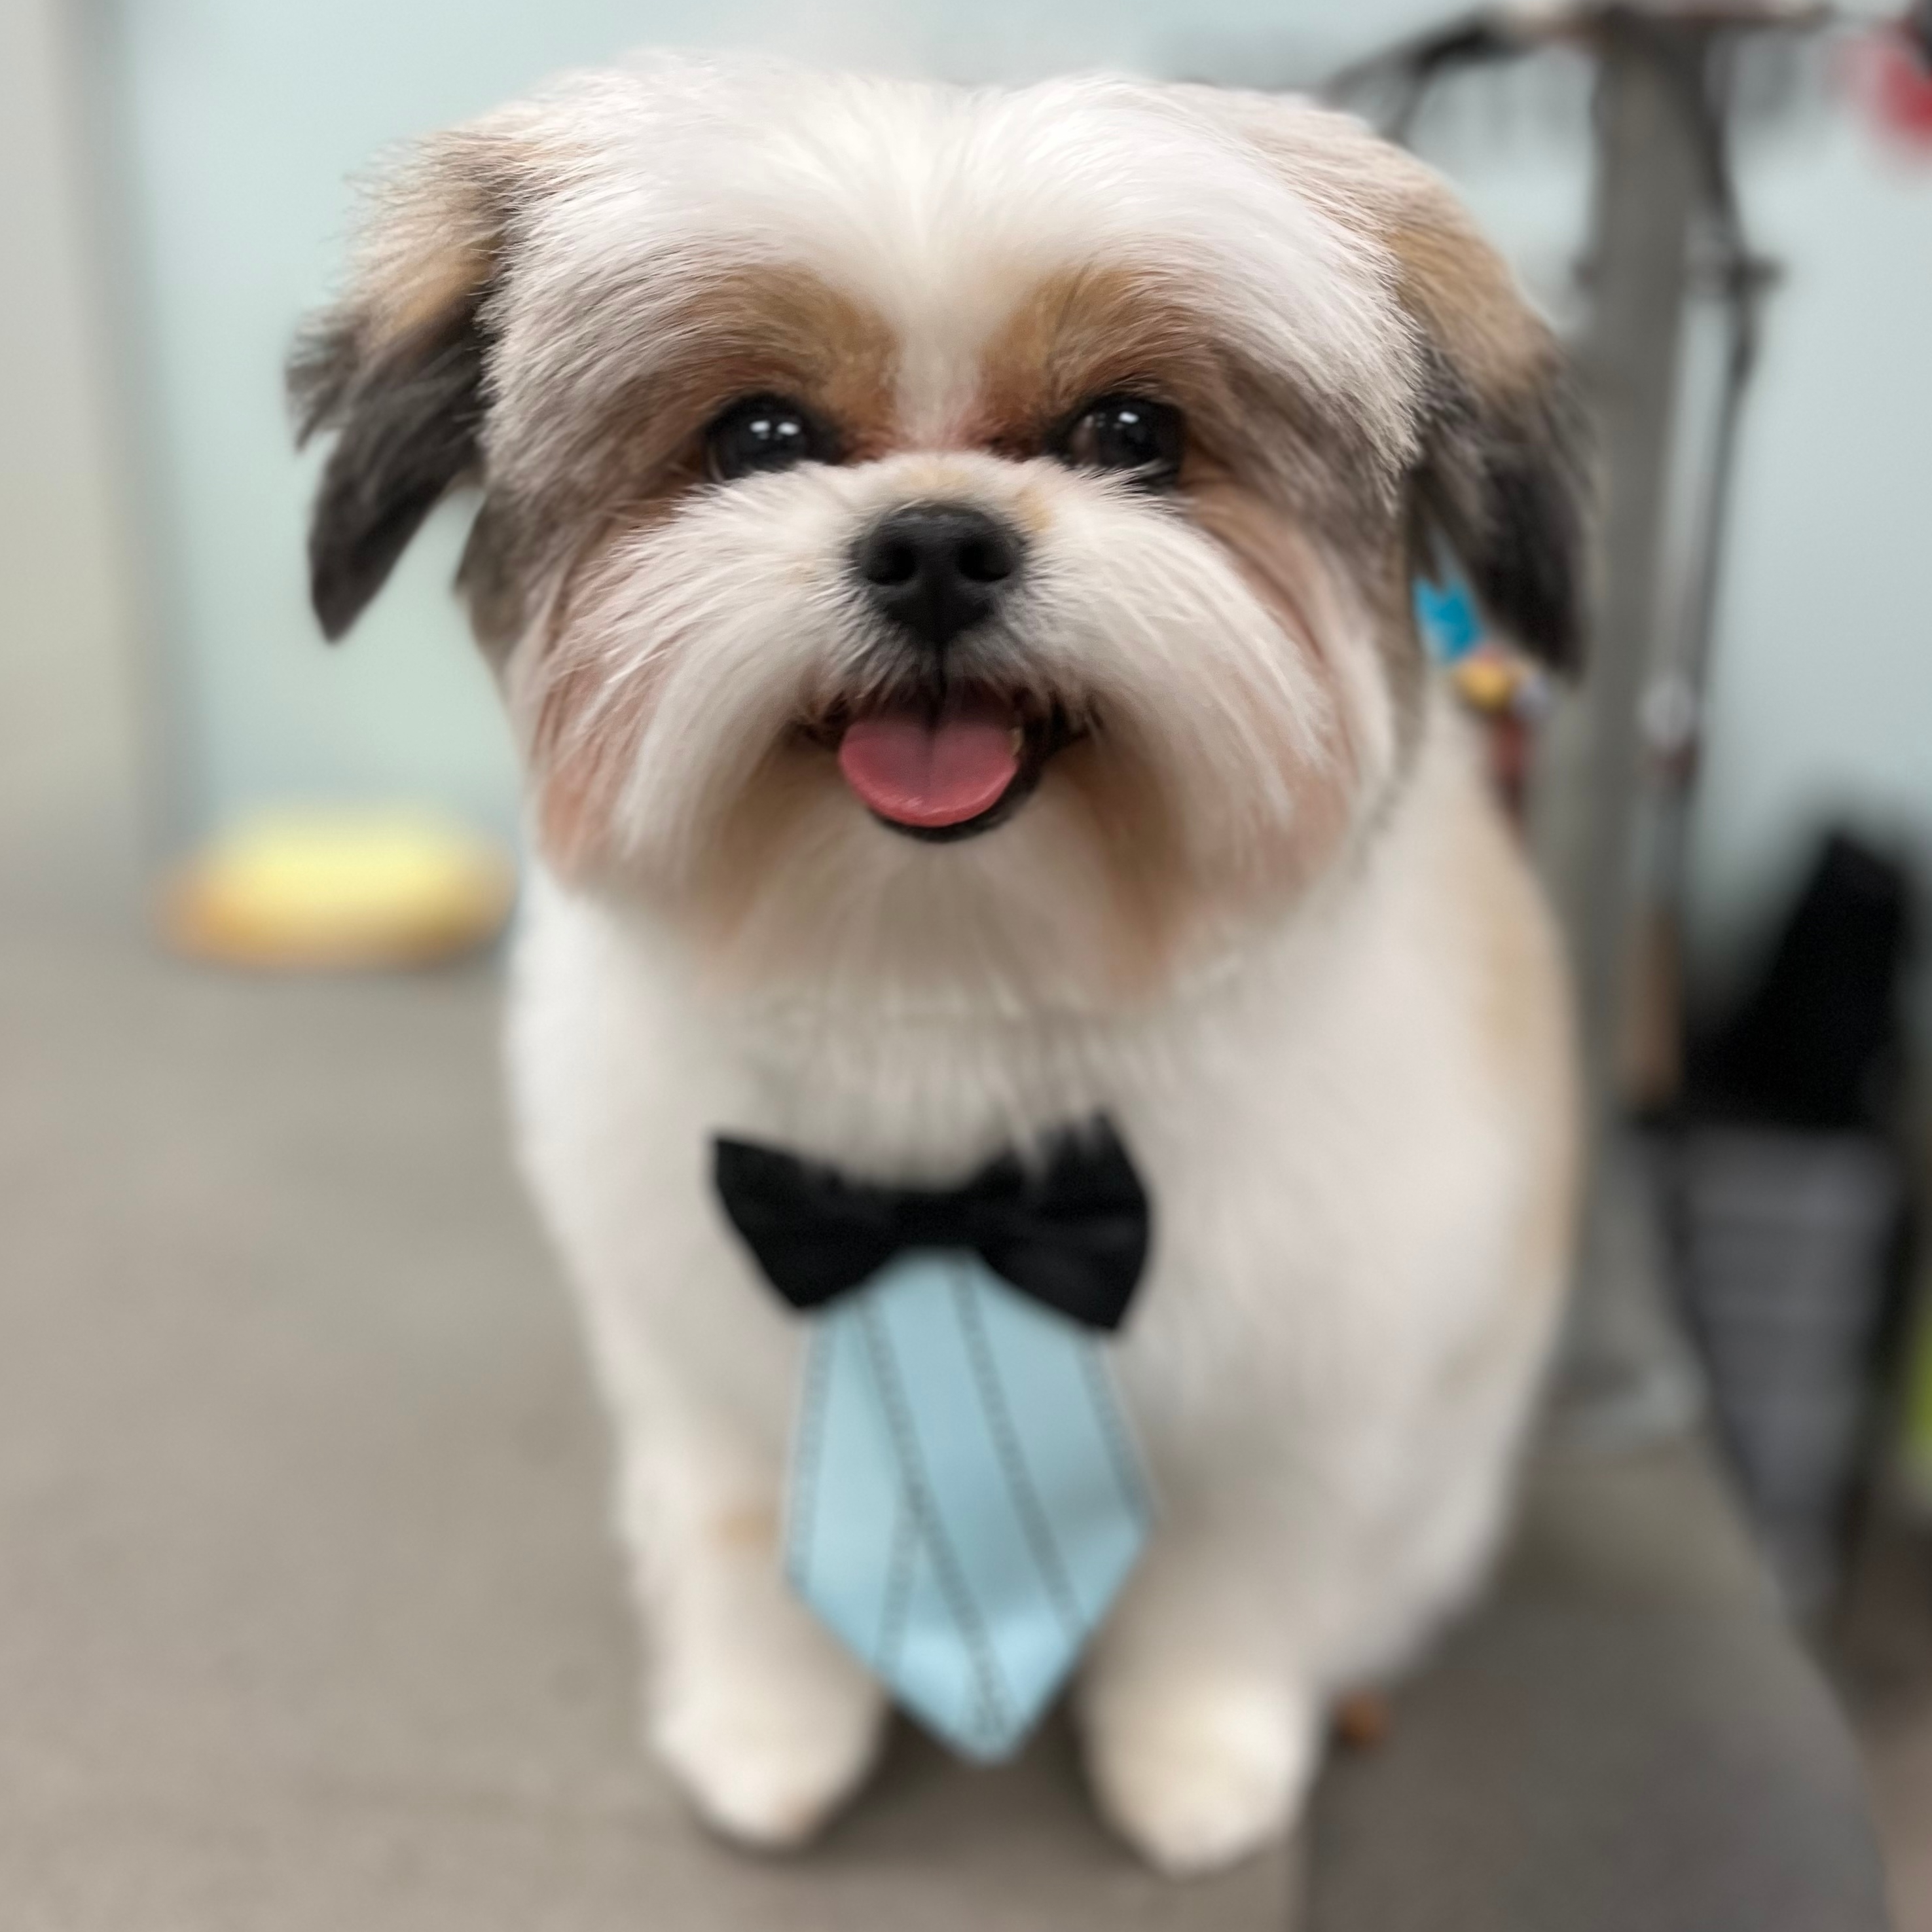 Shih Tzu ready for a night out, all groomed with Andis clippers, wearing a tie.